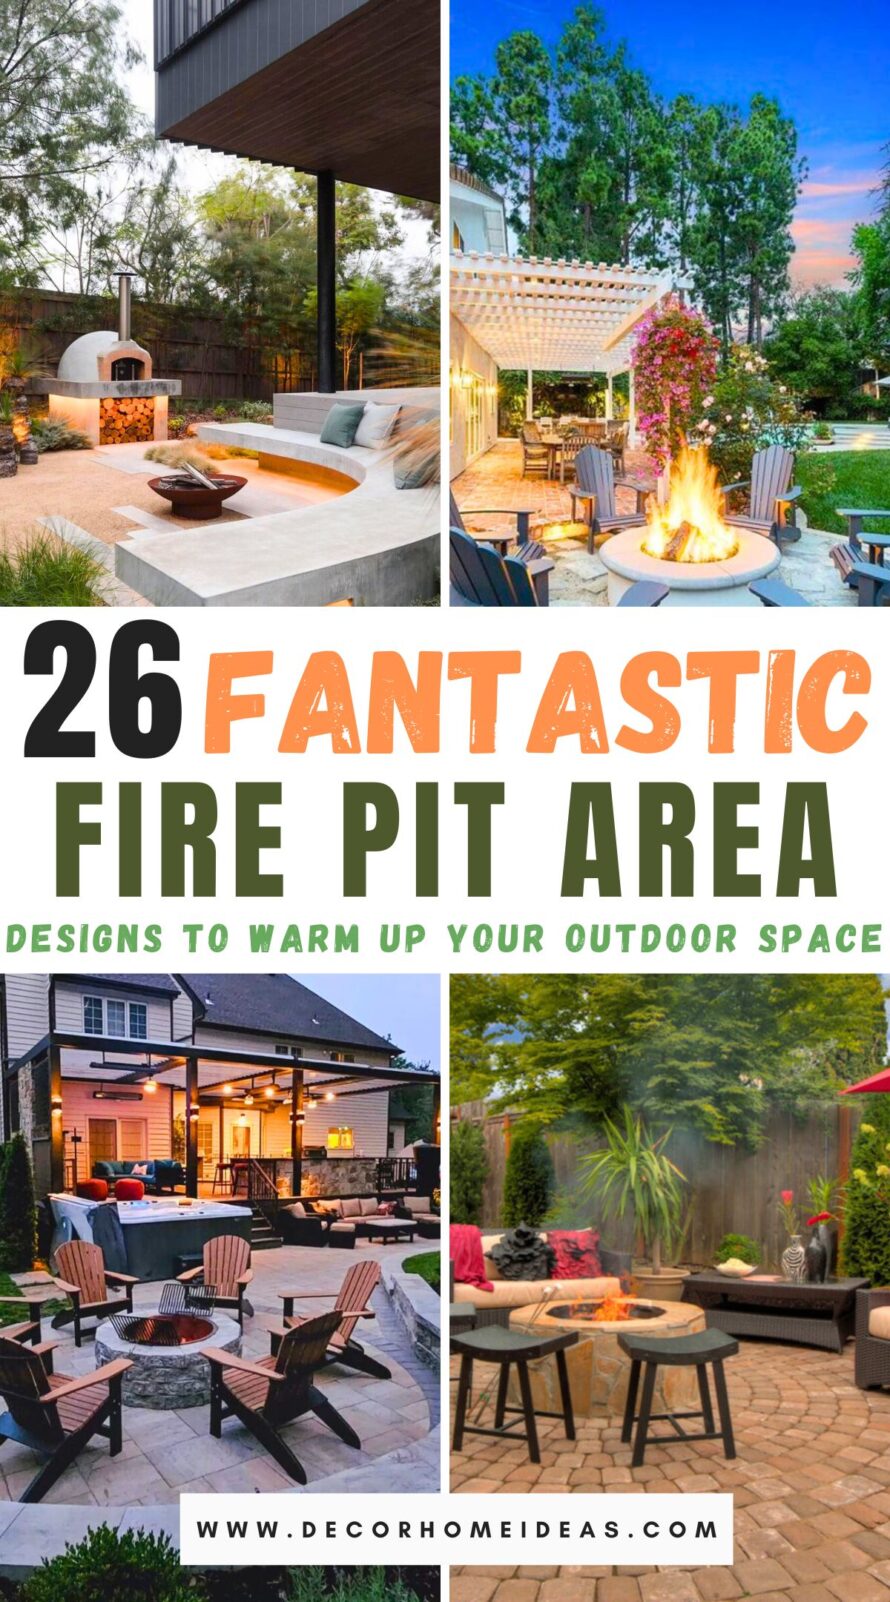 Explore 26 fantastic fire pit area designs to warm up your outdoor space. From cozy seating arrangements to stylish fire pit setups, these designs offer a perfect blend of comfort and ambiance, creating a welcoming atmosphere for gatherings or quiet evenings under the stars.